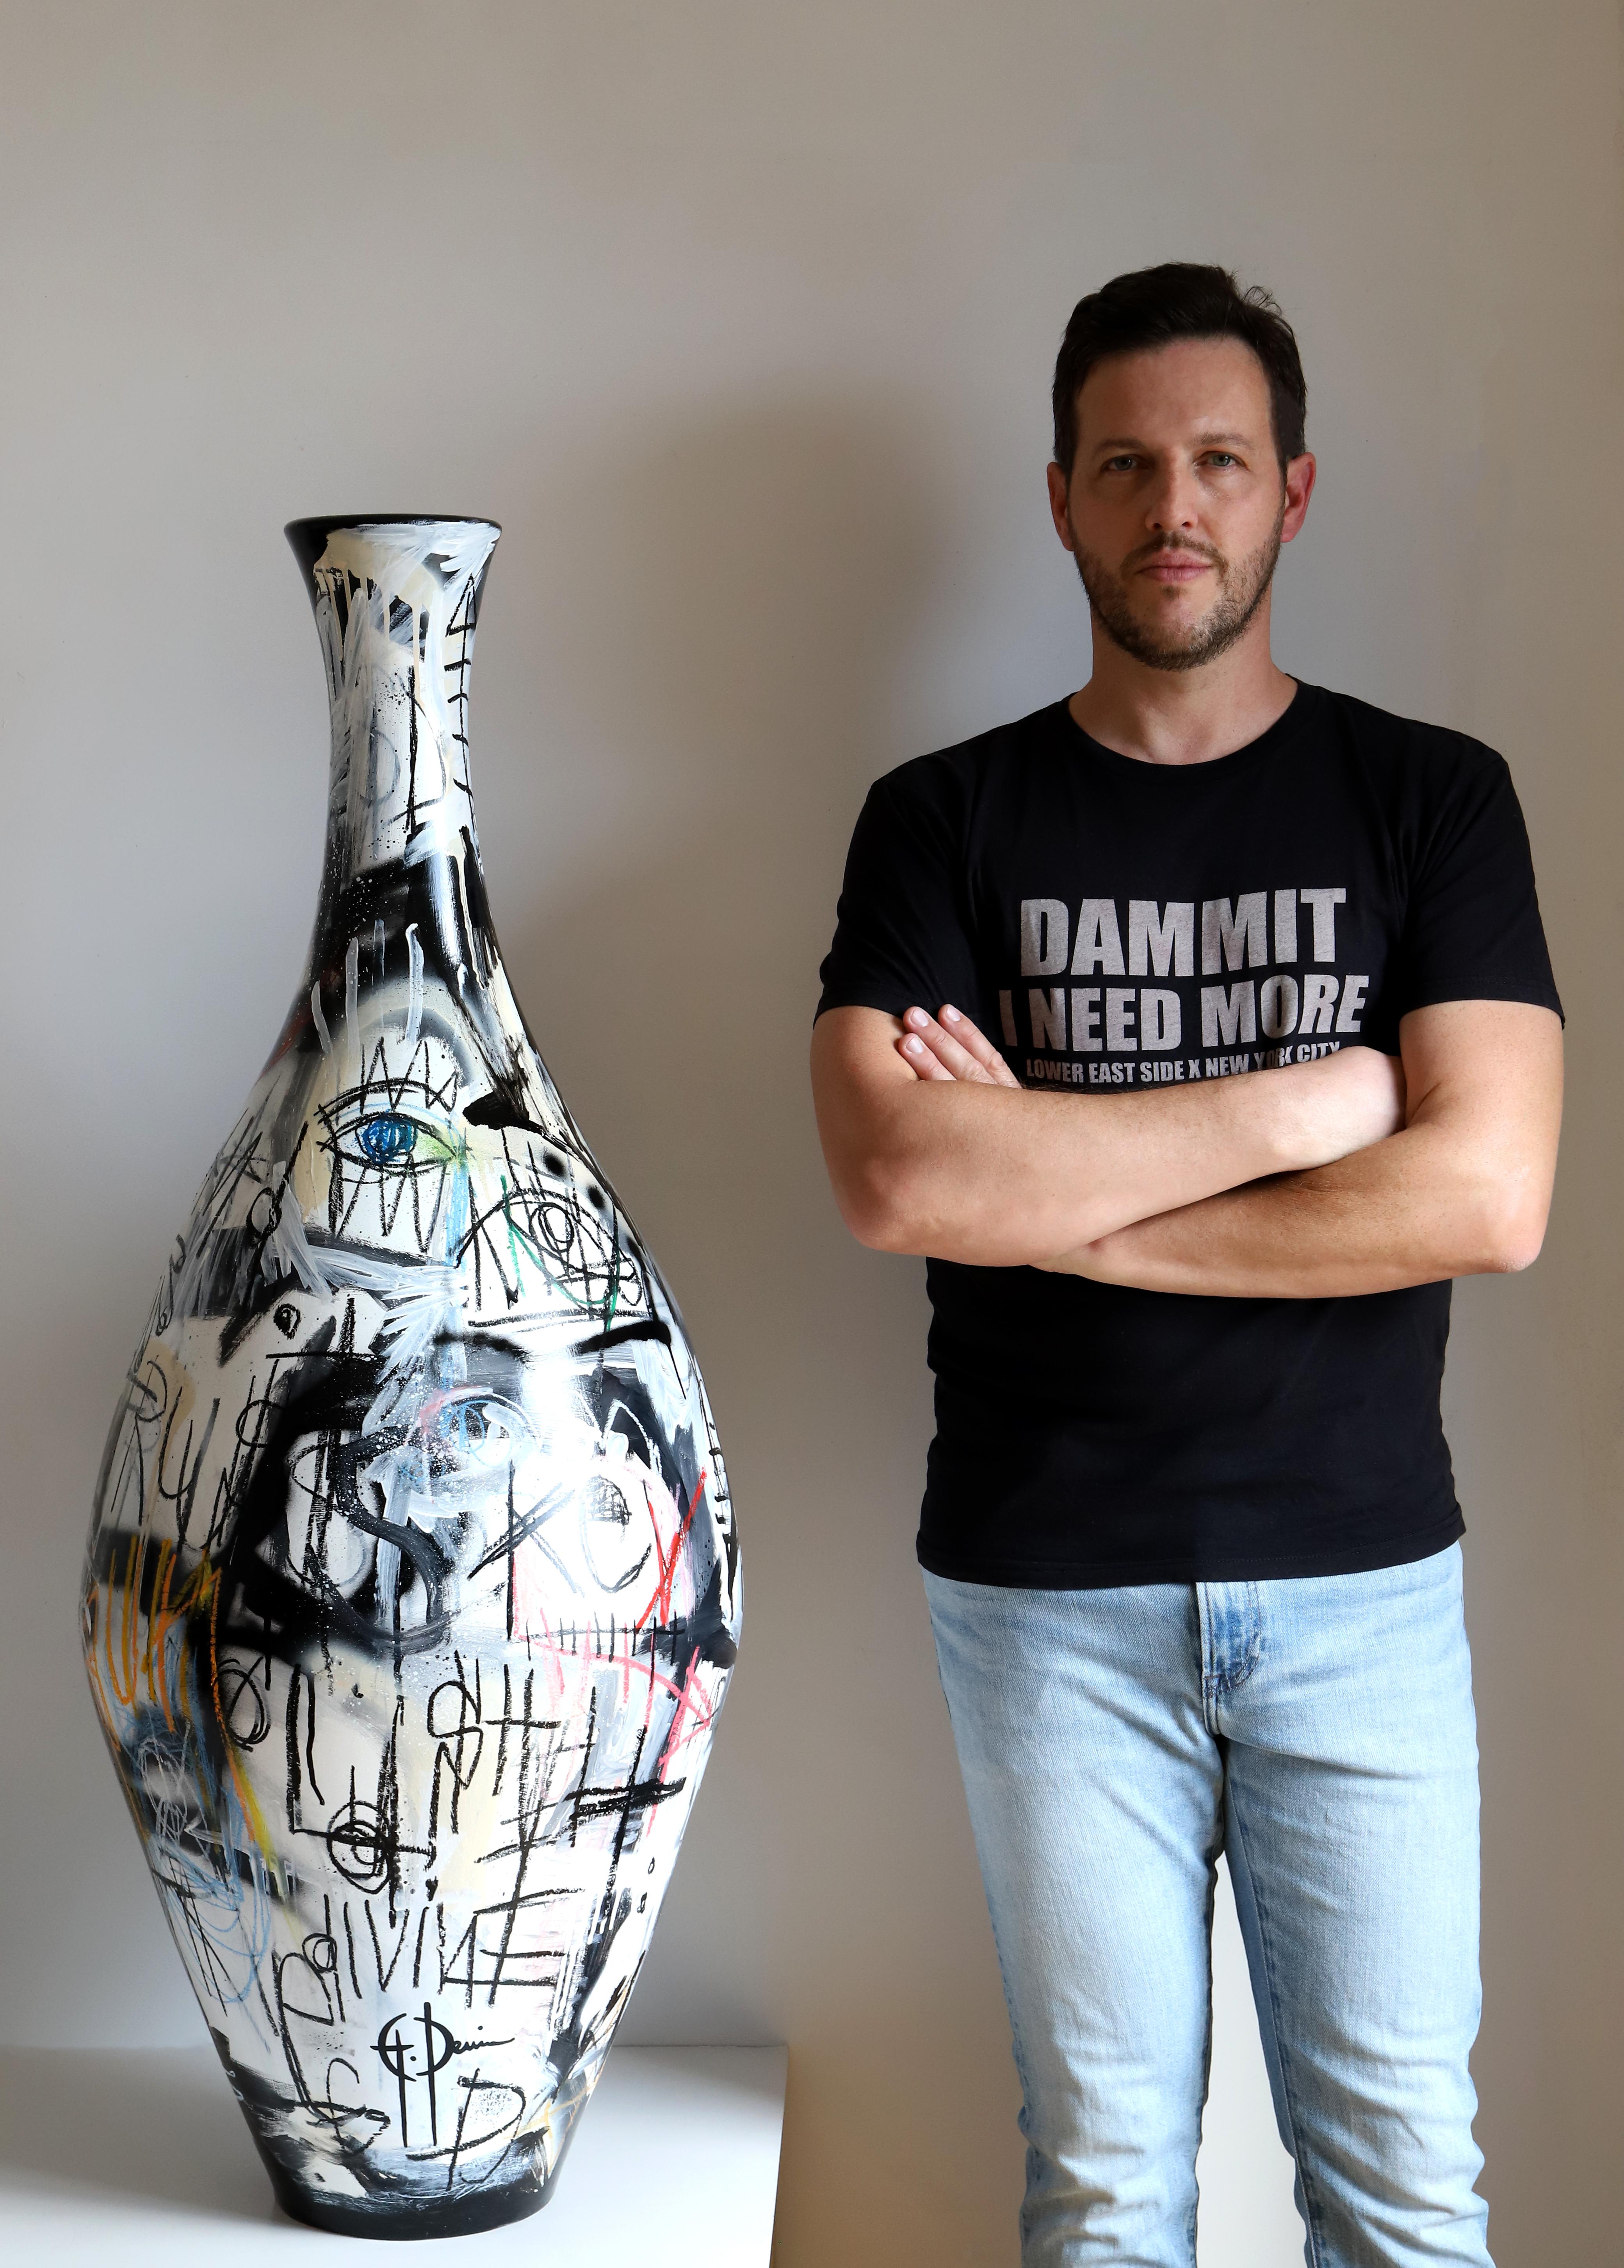 Inspired by everyday life, his travels, current events and people he meets, Grégoire creates poignant abstract and figurative sculptures and paintings.
In 2018 at the Dubai Global Art Awards, Grégoire Devin won the Best Global Artist Award,